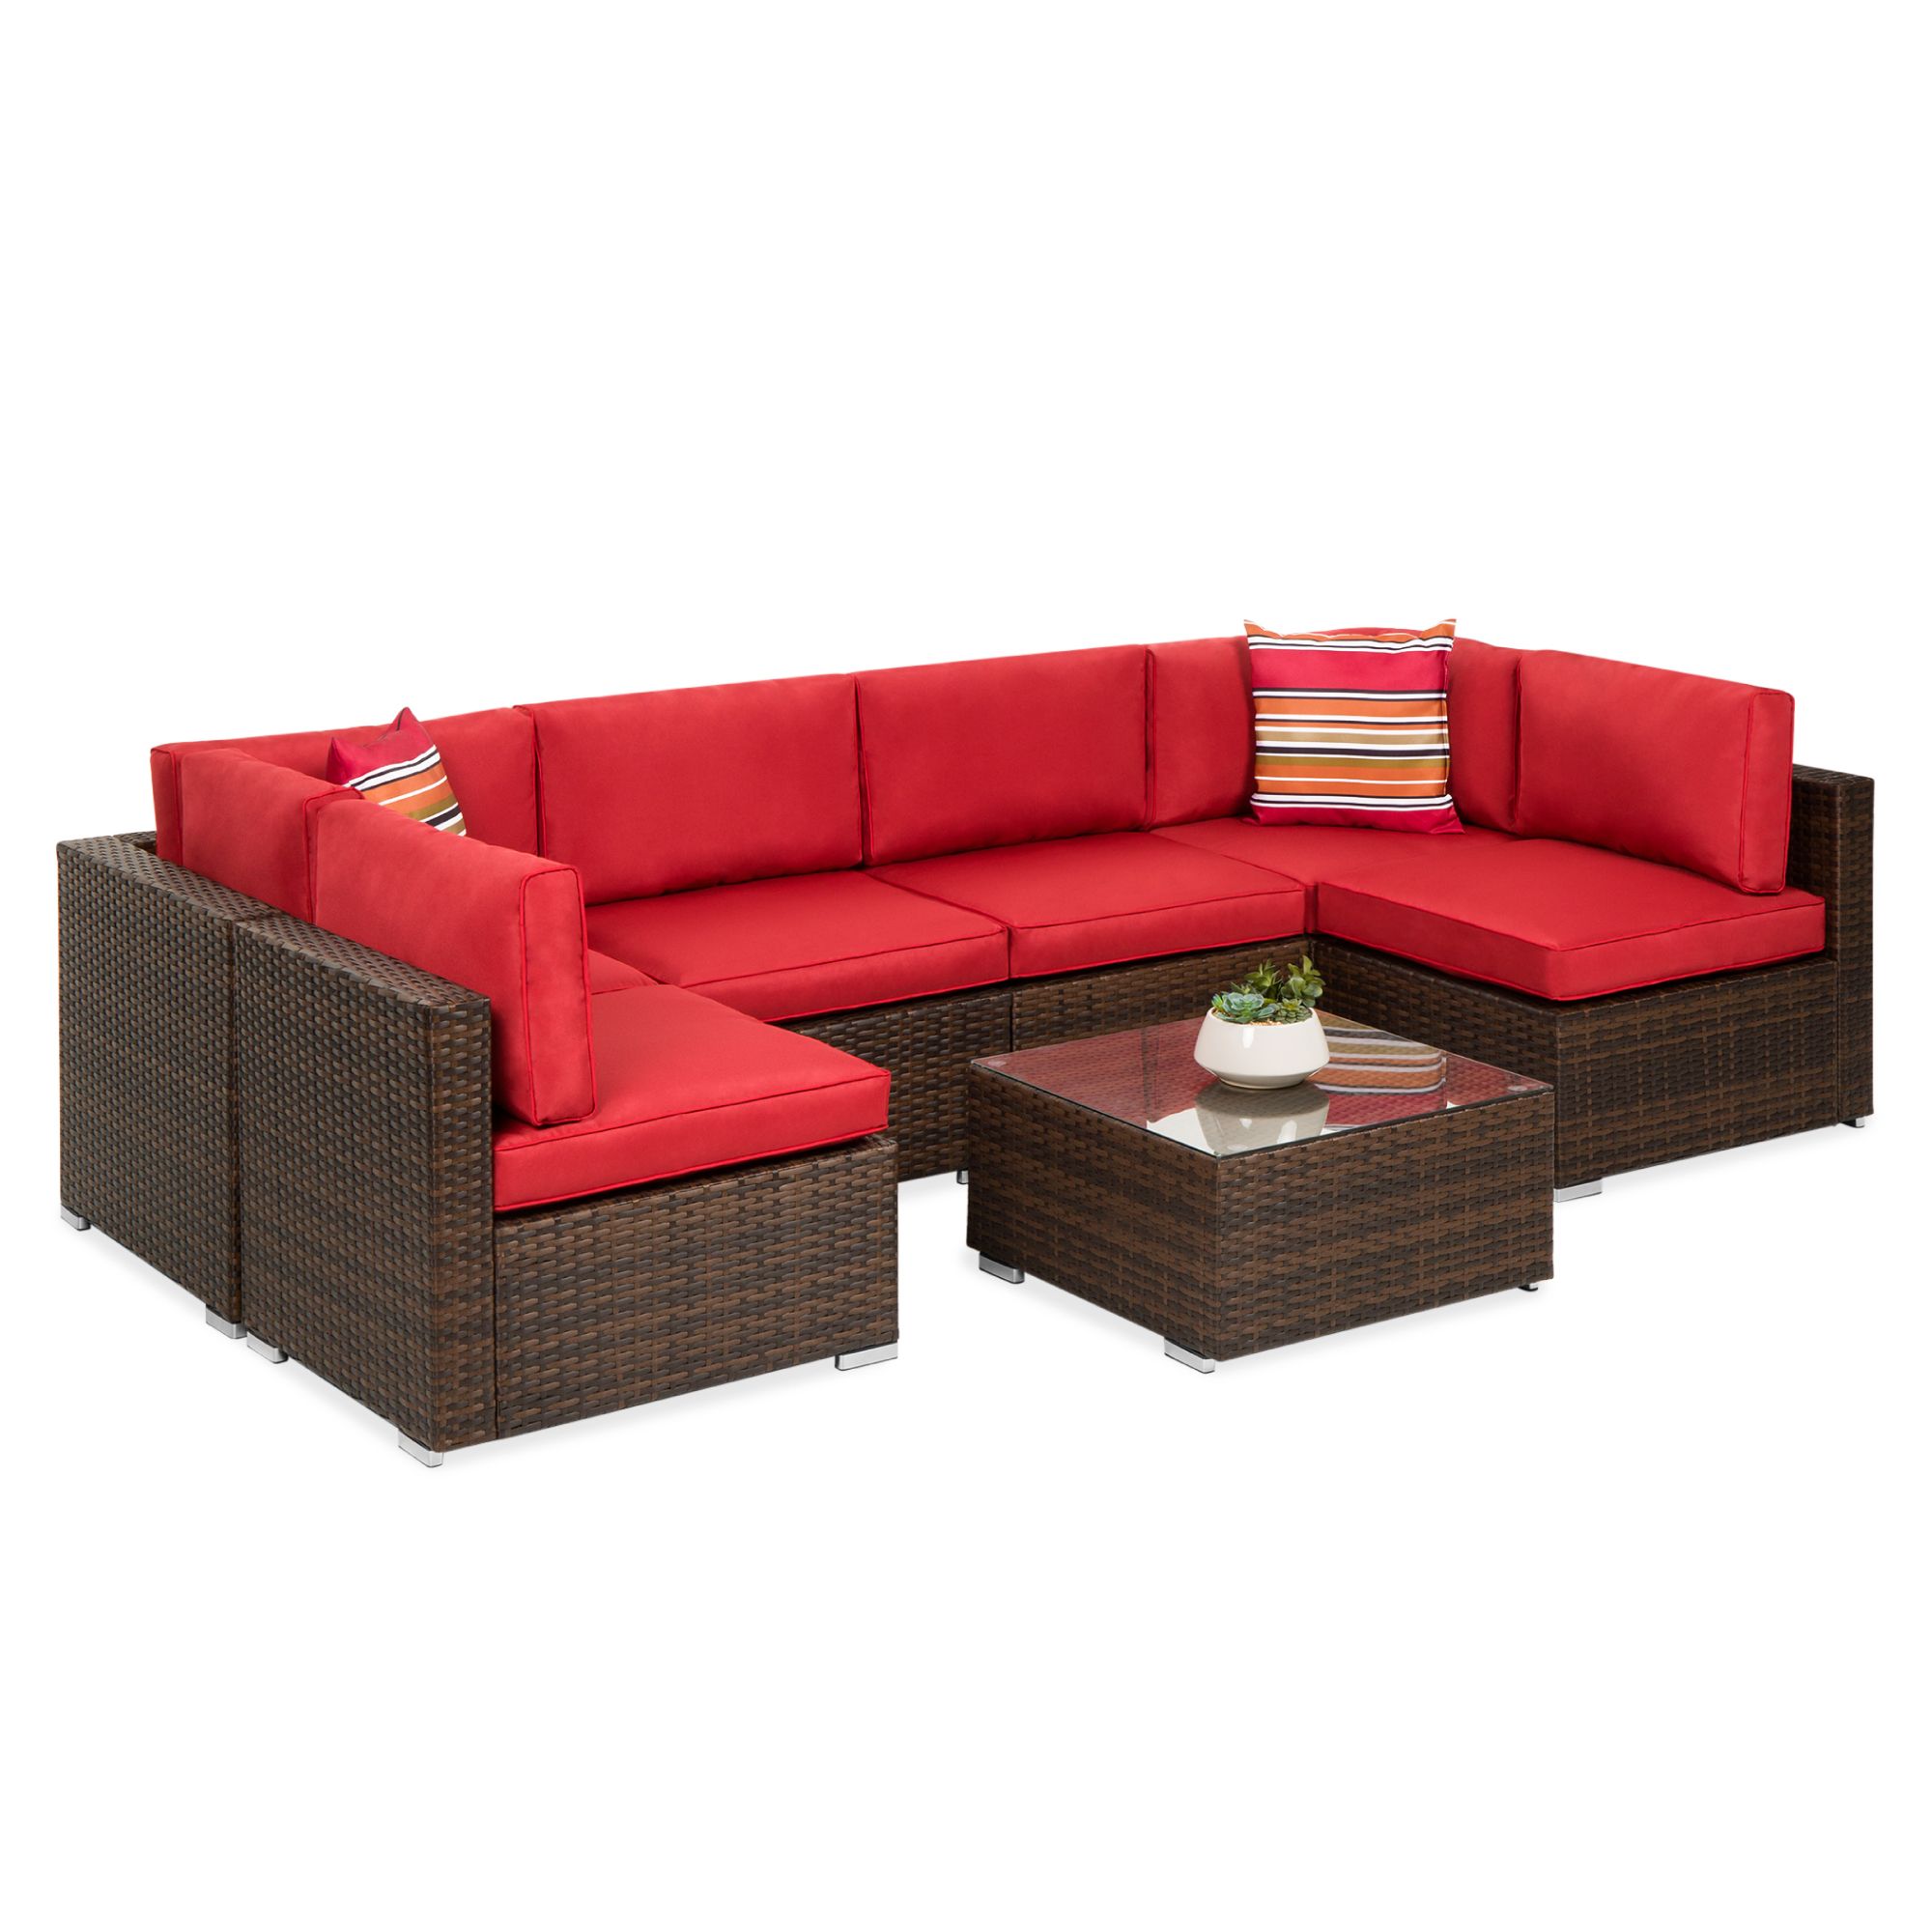 Best Choice Products 7 Piece Modular Outdoor Conversational Furniture Intended For Rustic Brown Sectional Corner Desks (View 10 of 15)